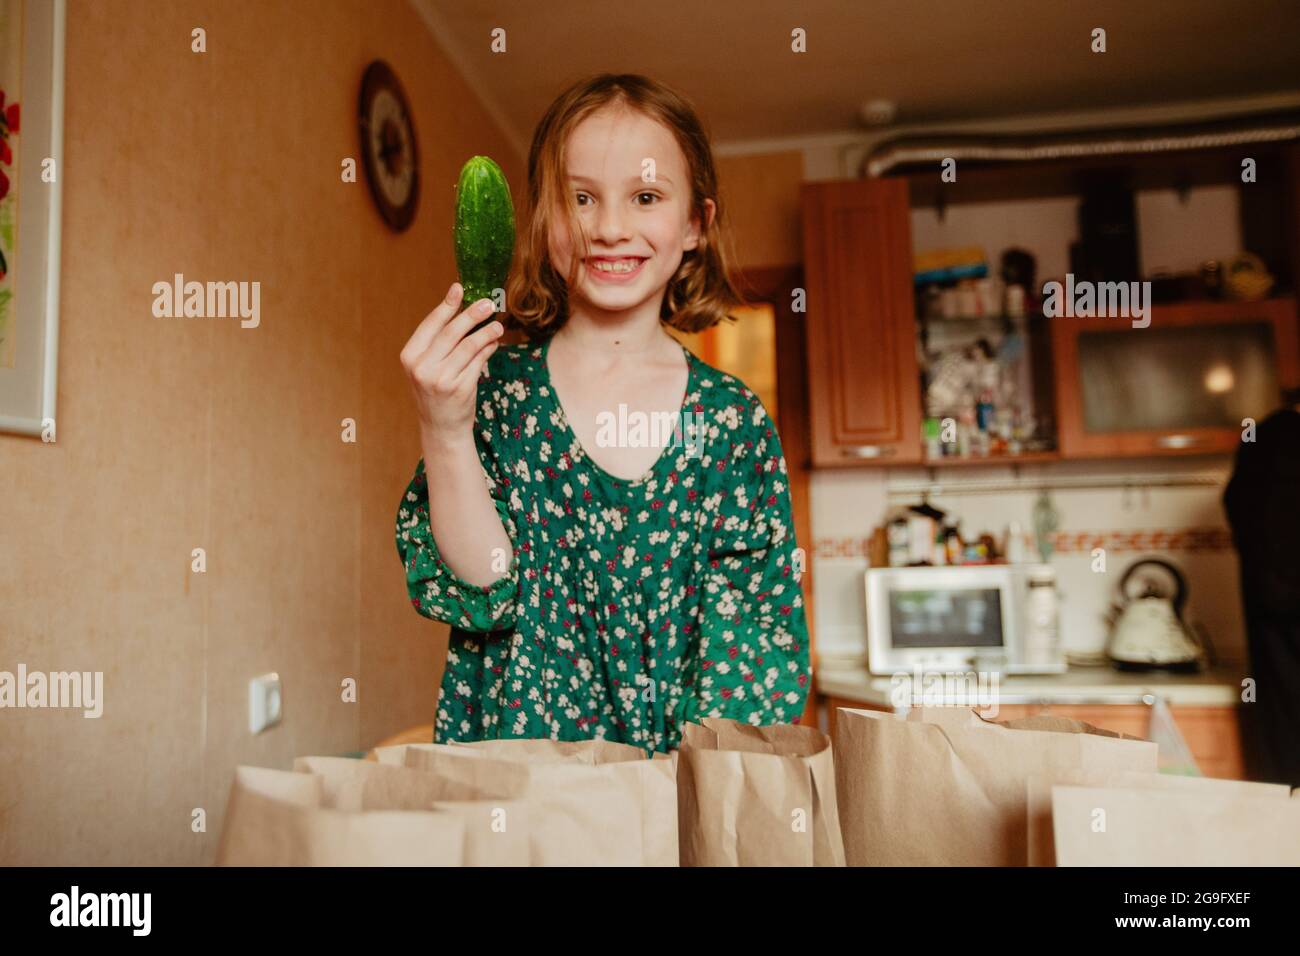 Joyful girl in green dress demonstrating ripe cucumber and looking at camera while standing in kitchen Stock Photo